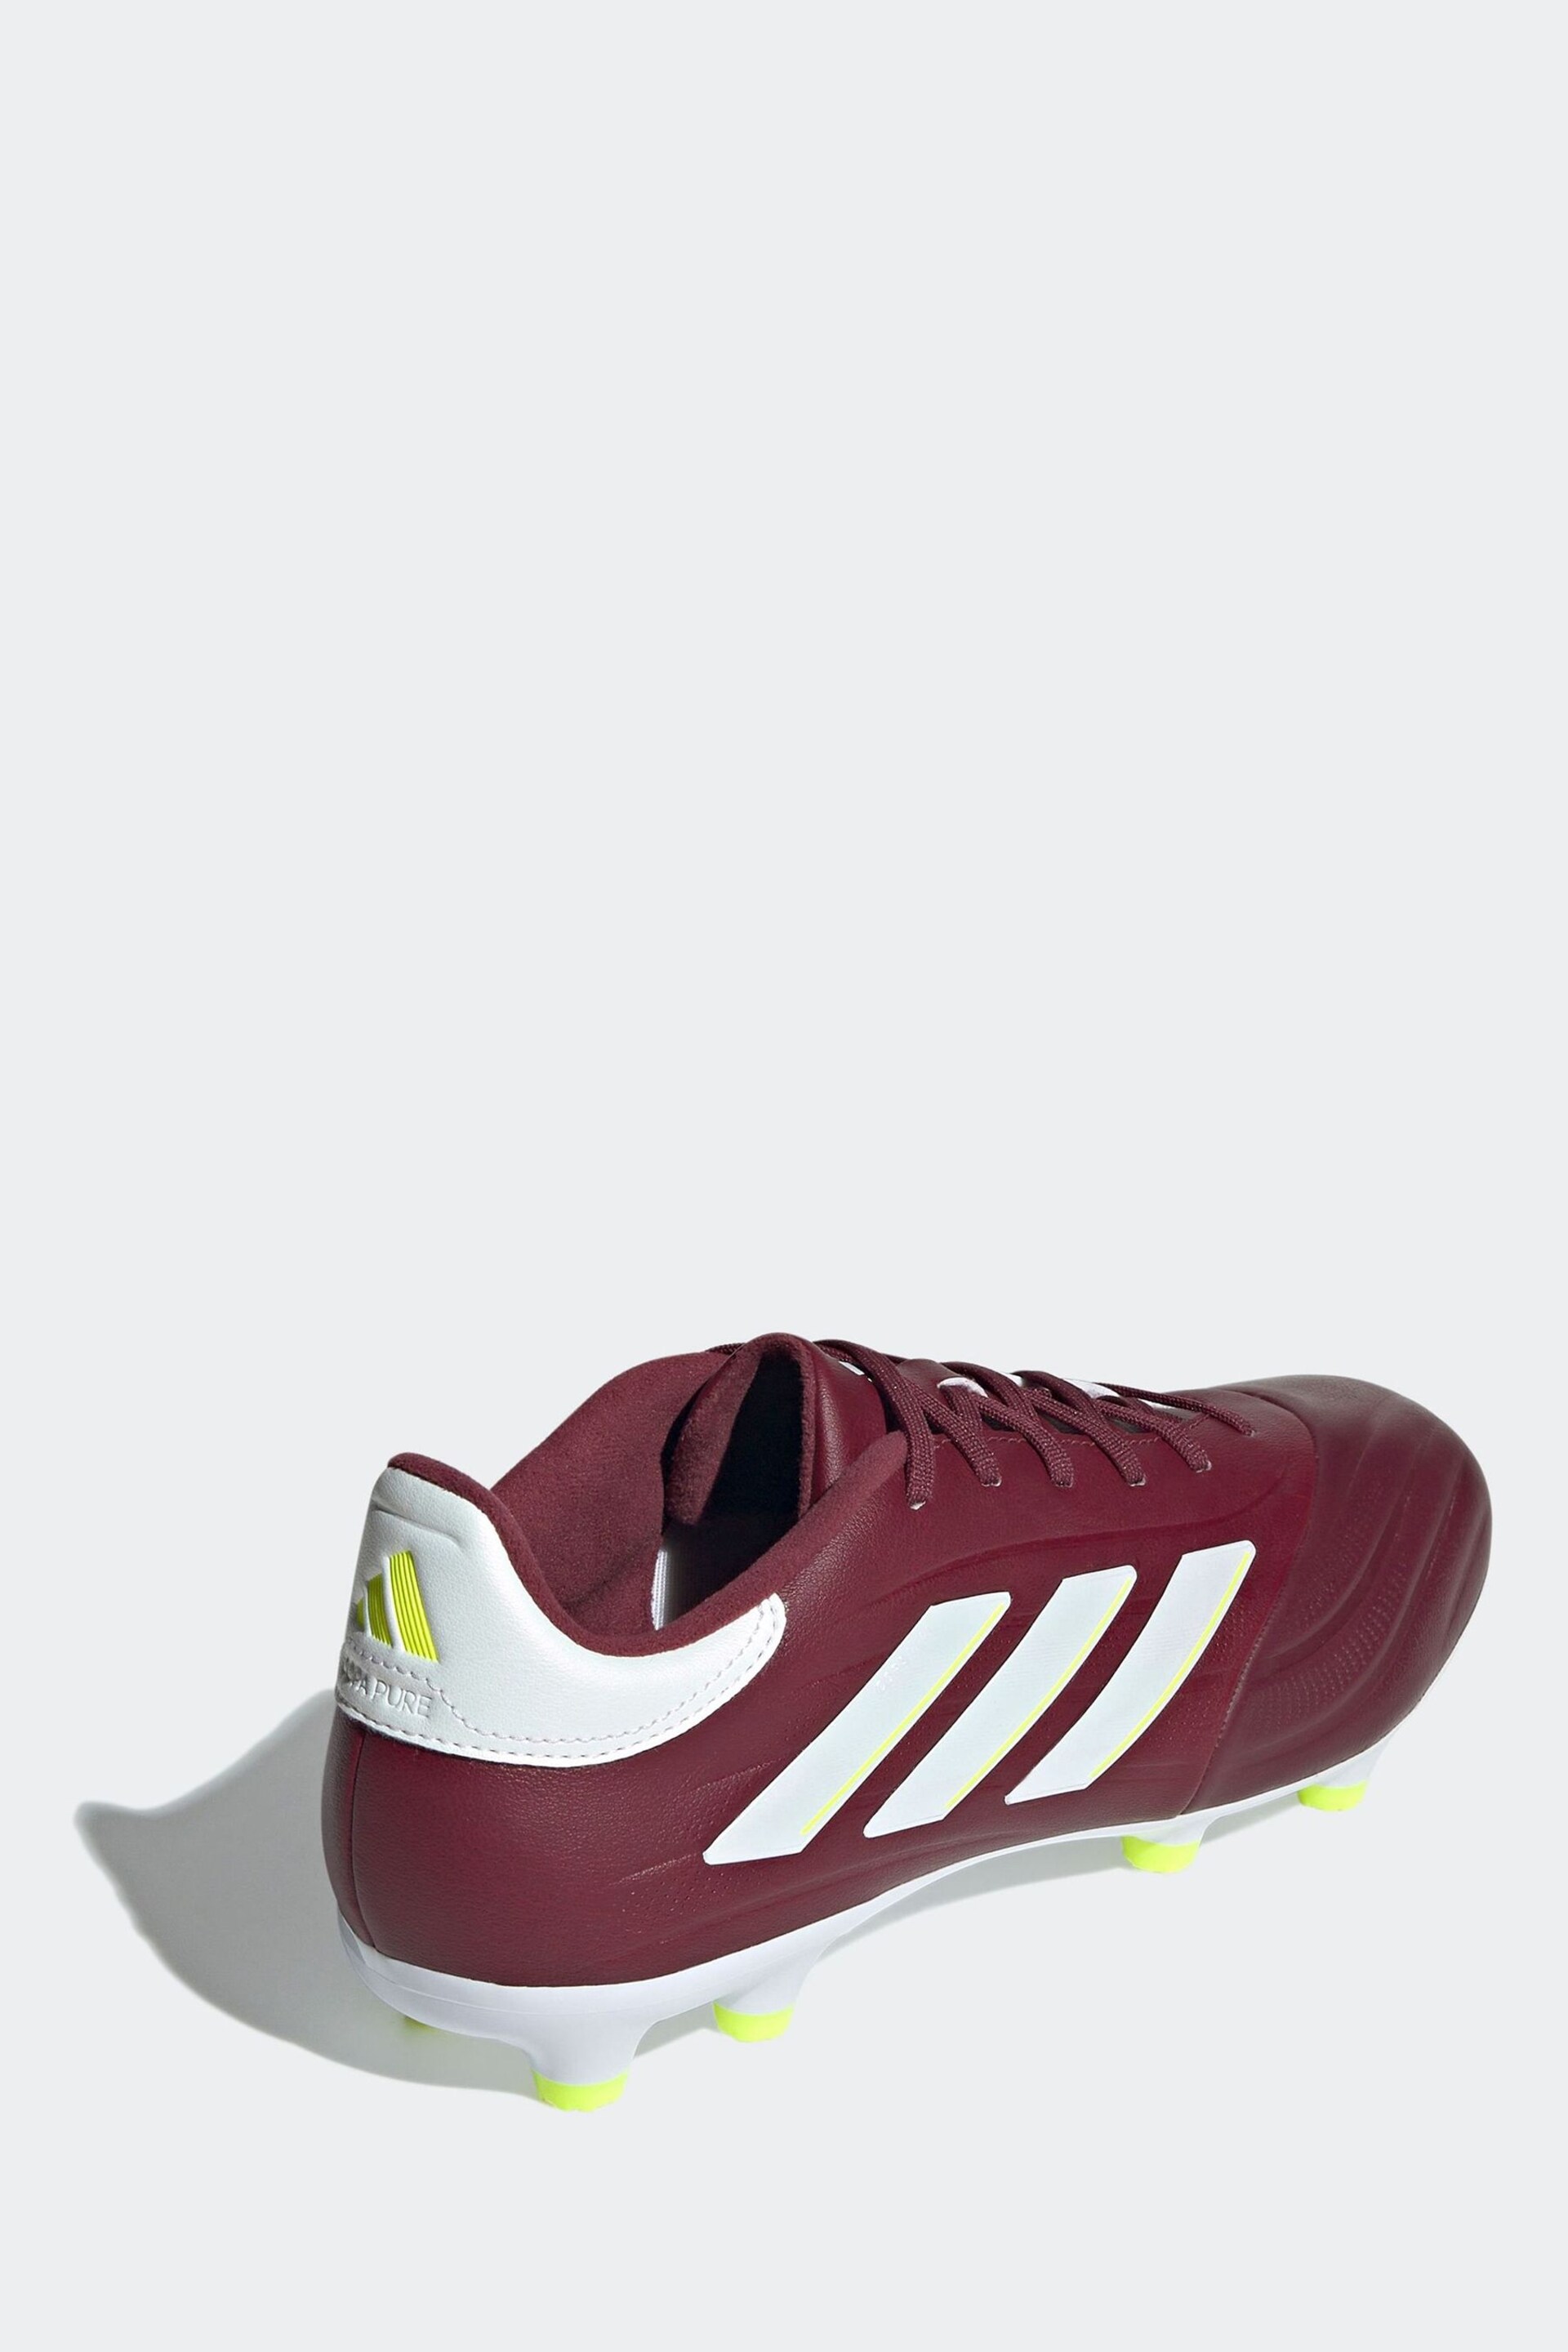 adidas Red/White Football Red/White Copa Pure II League Firm Ground Adult Boots - Image 2 of 22